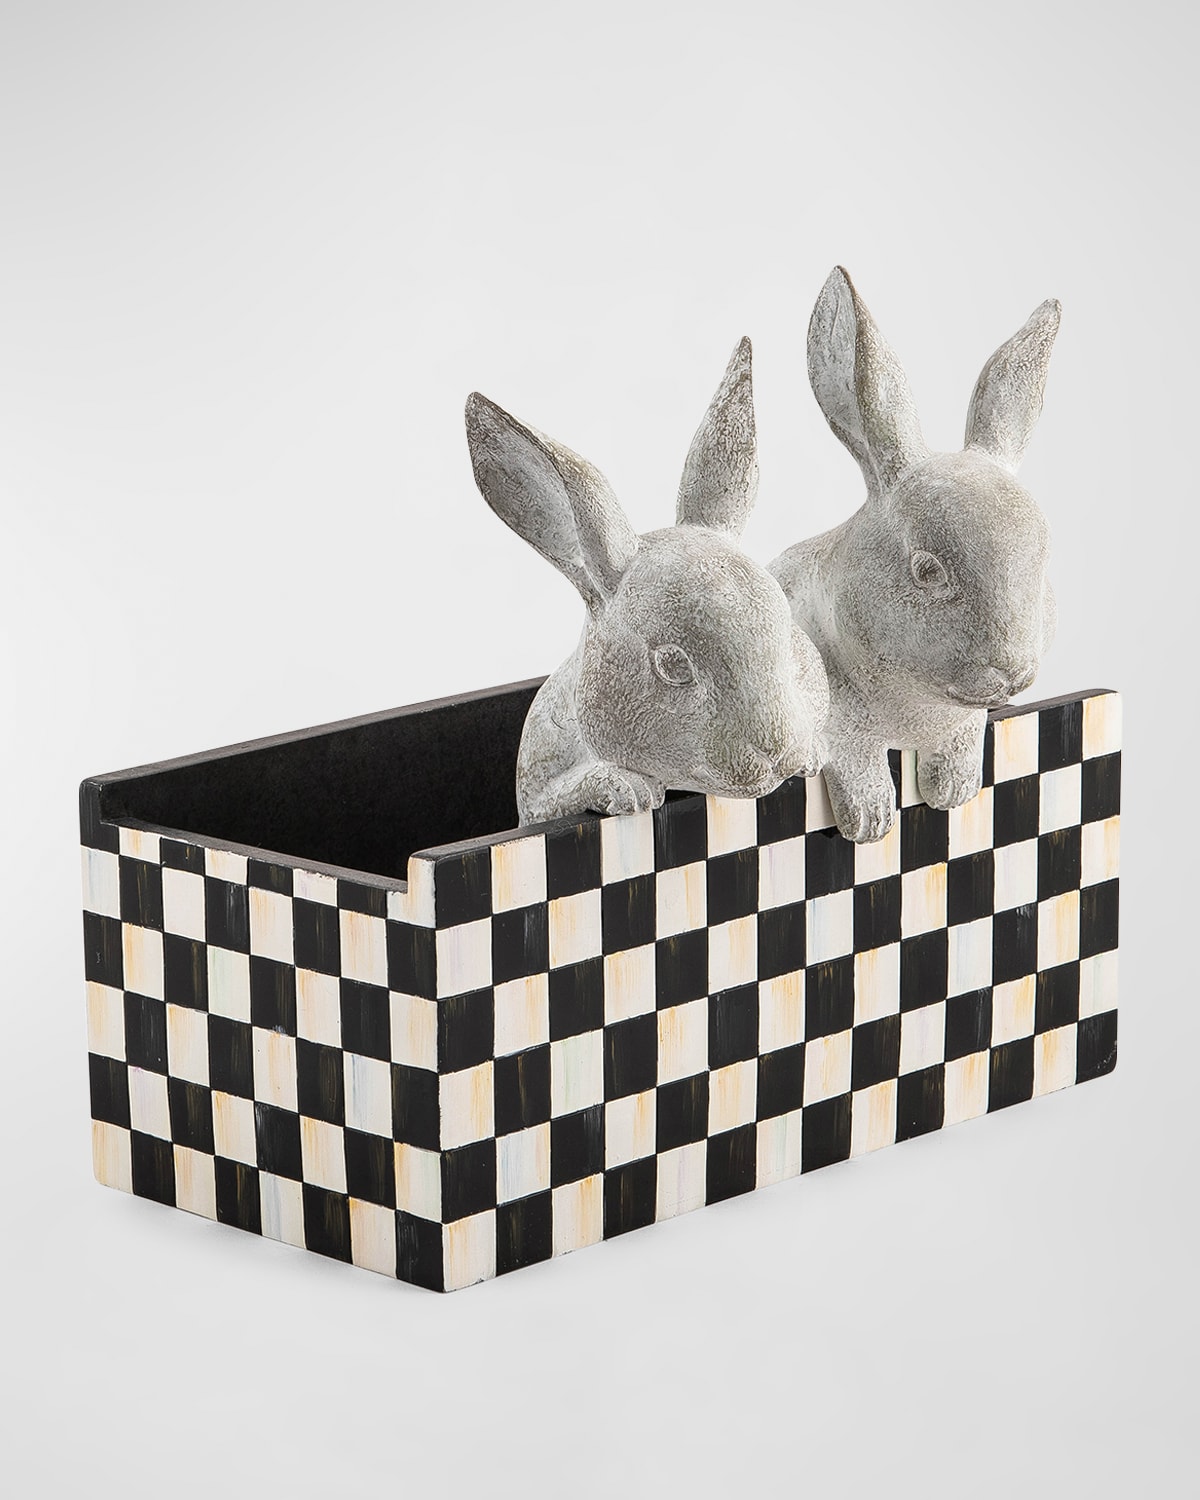 Mackenzie-childs Courtly Check Bunny Planter In Black